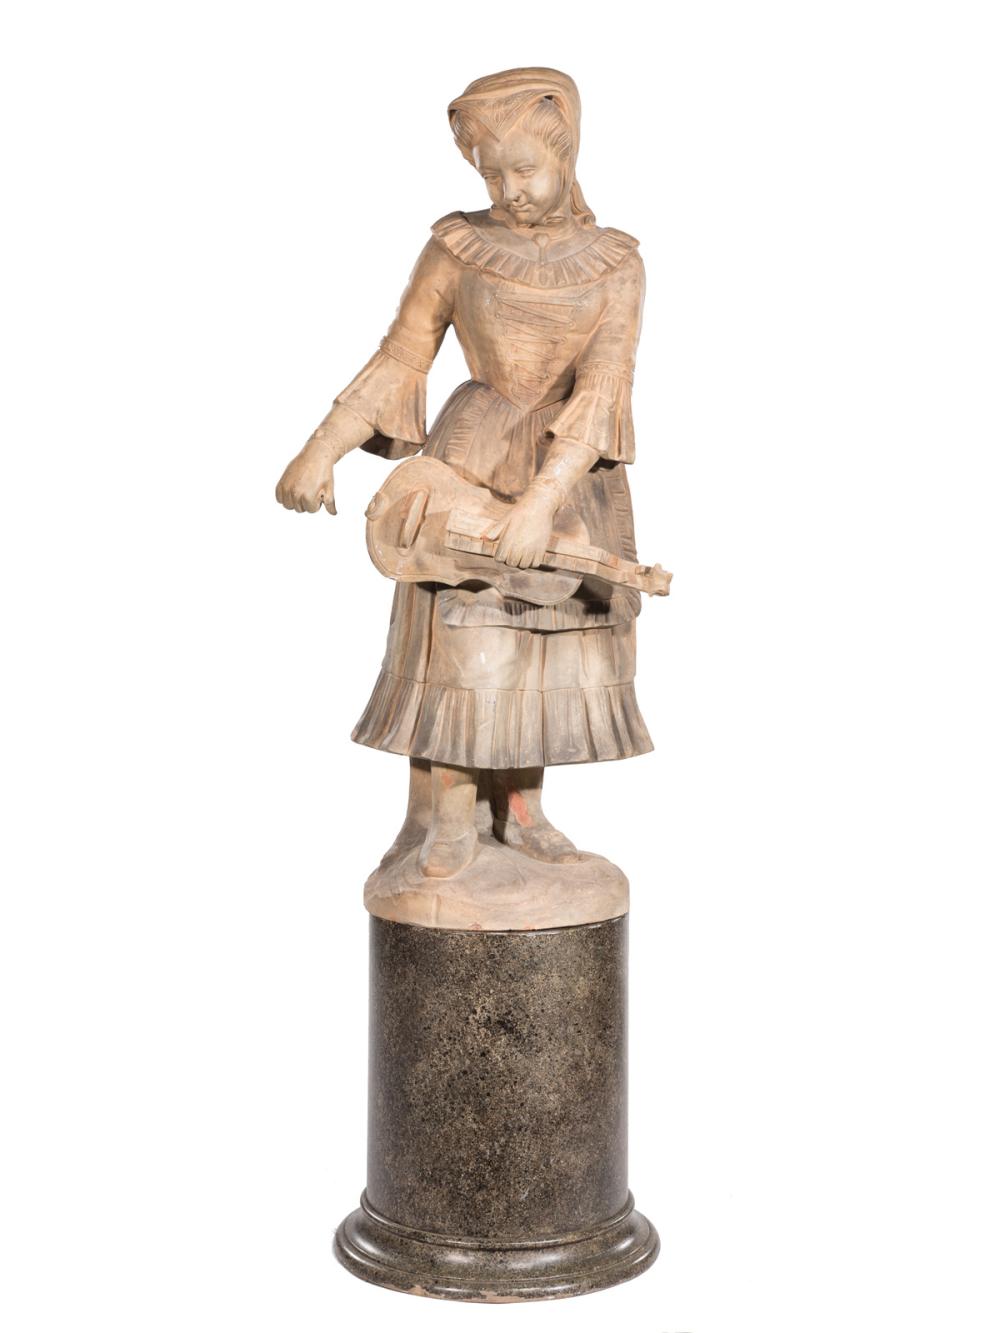 TERRACOTTA FIGURE OF A LADY PLAYING